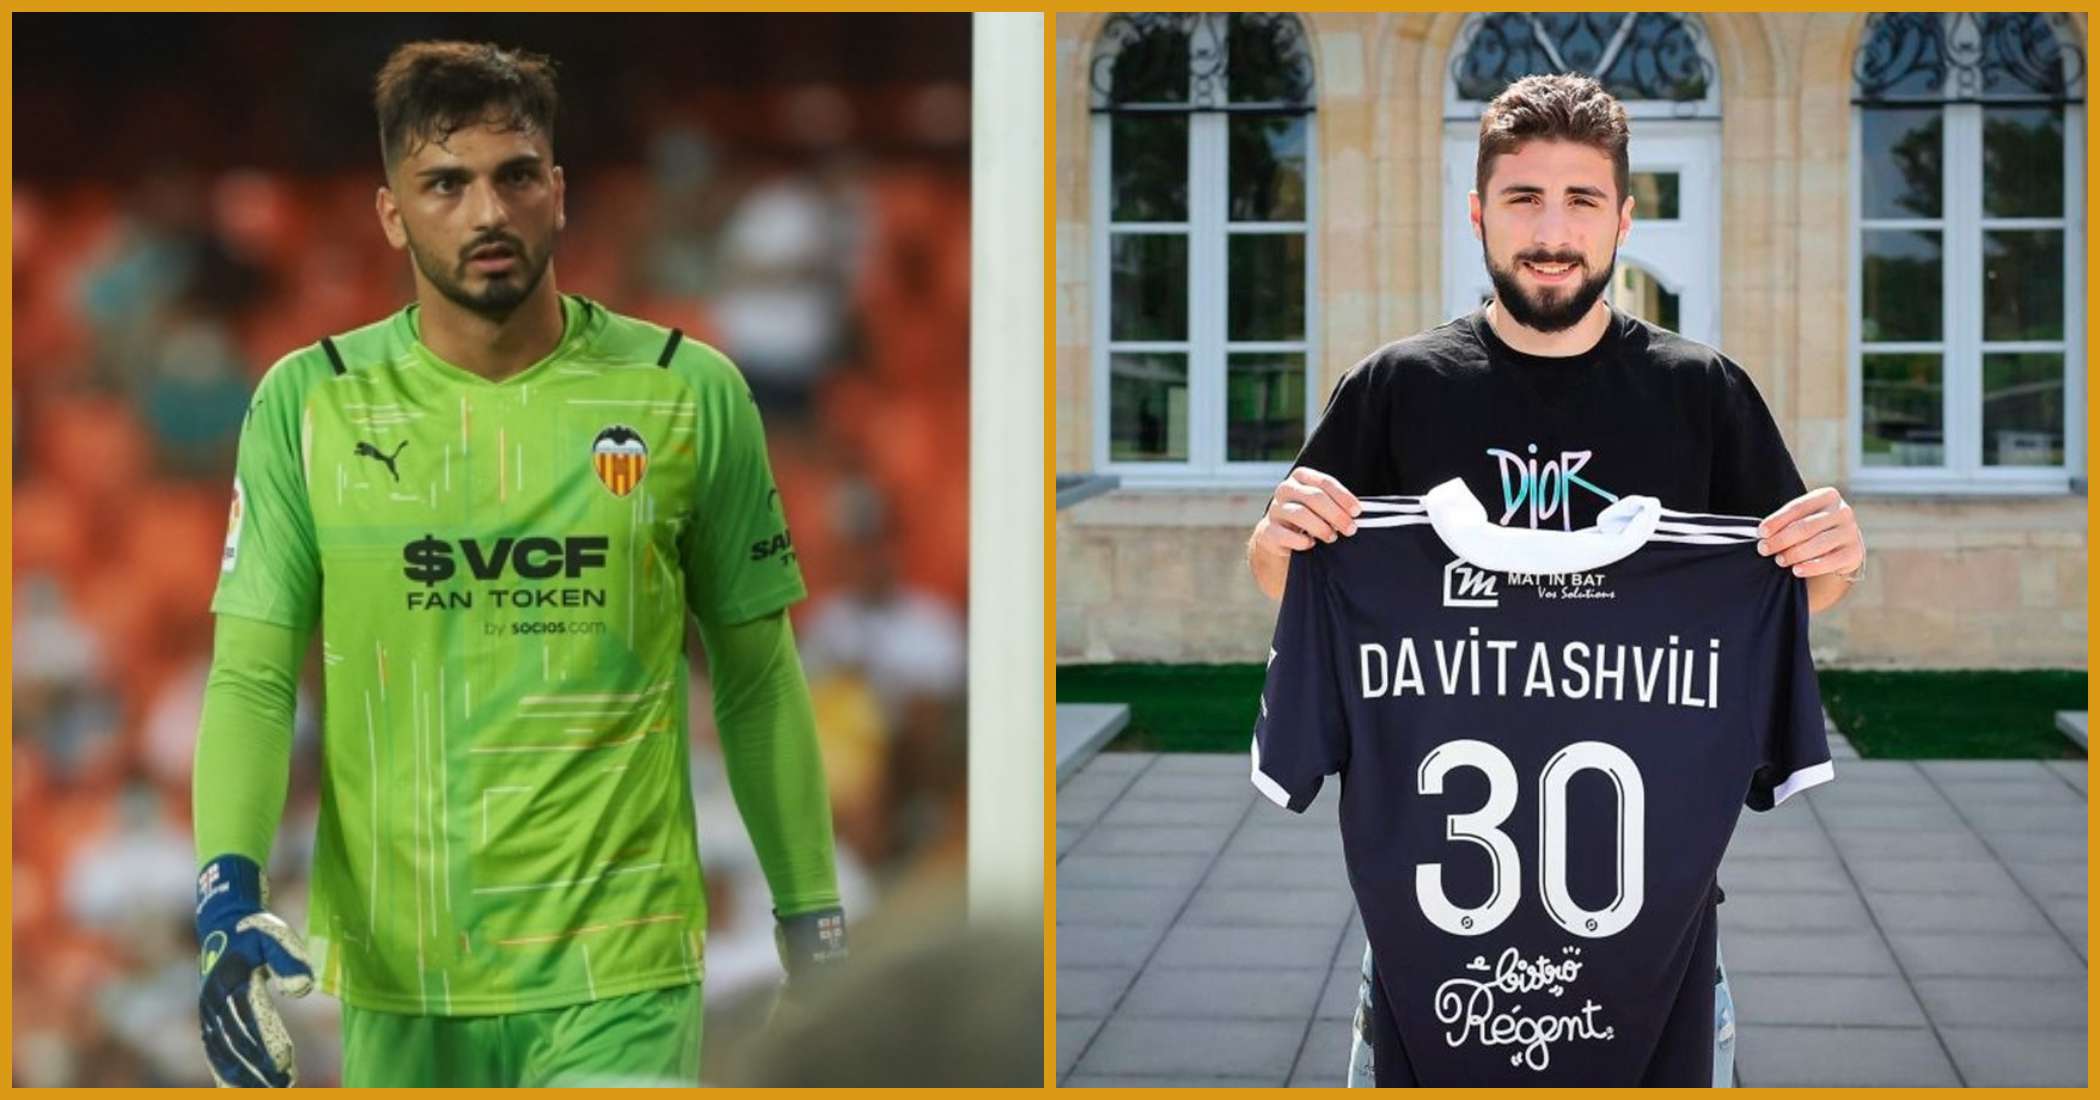 Famous Georgian football players expressed their support for the